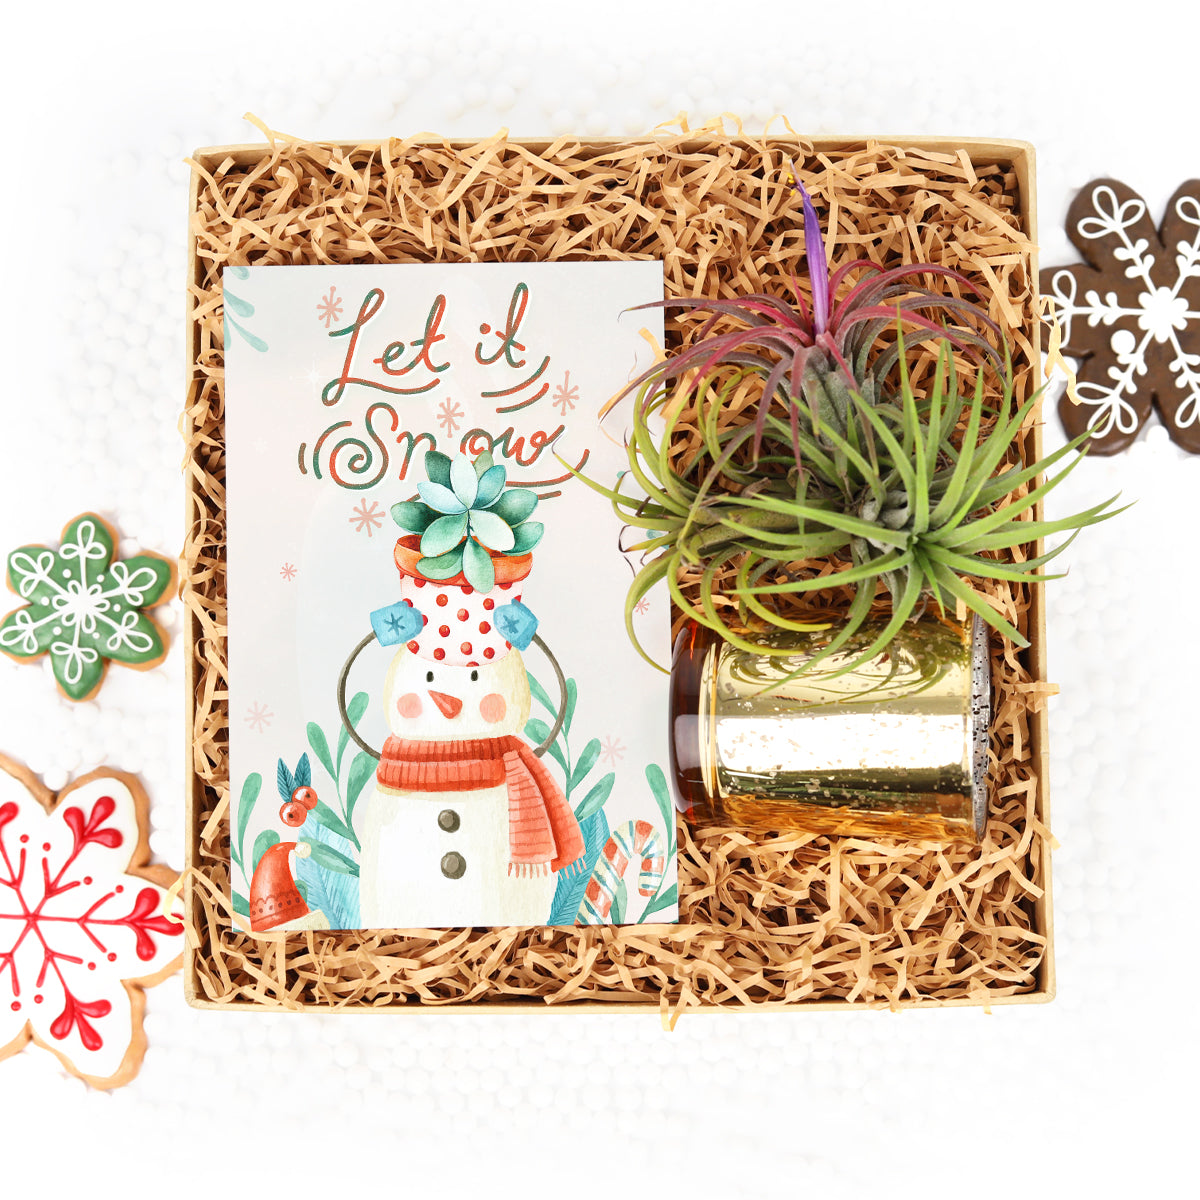 Christmas Succulents, Christmas Succulent Plants, Succulents for Christmas Ideas in 2023, Succulent Christmas Decorations, Succulent Christmas Gift Ideas, Succulent Christmas Gift Box for Sale, Succulent Holiday Gift Box